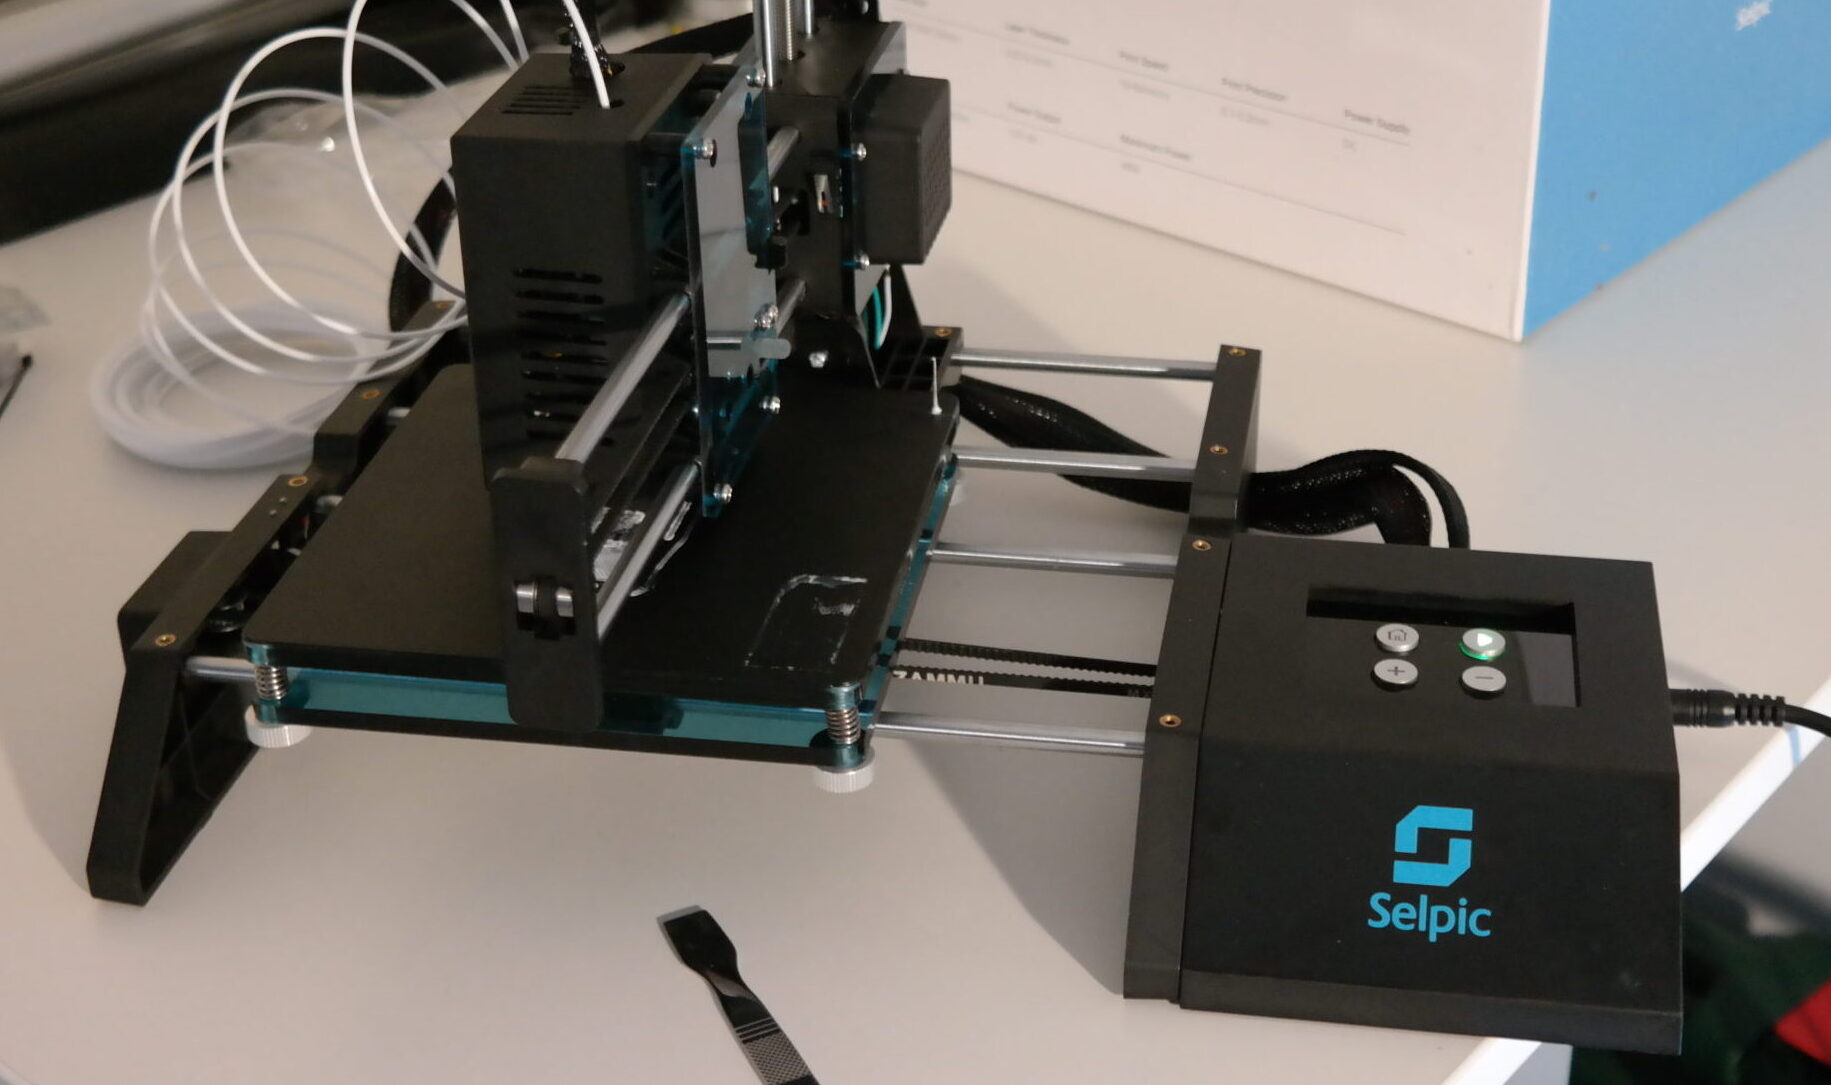 Selpic Star A – A Cost-Effective Multifunctional mini 3D Printer